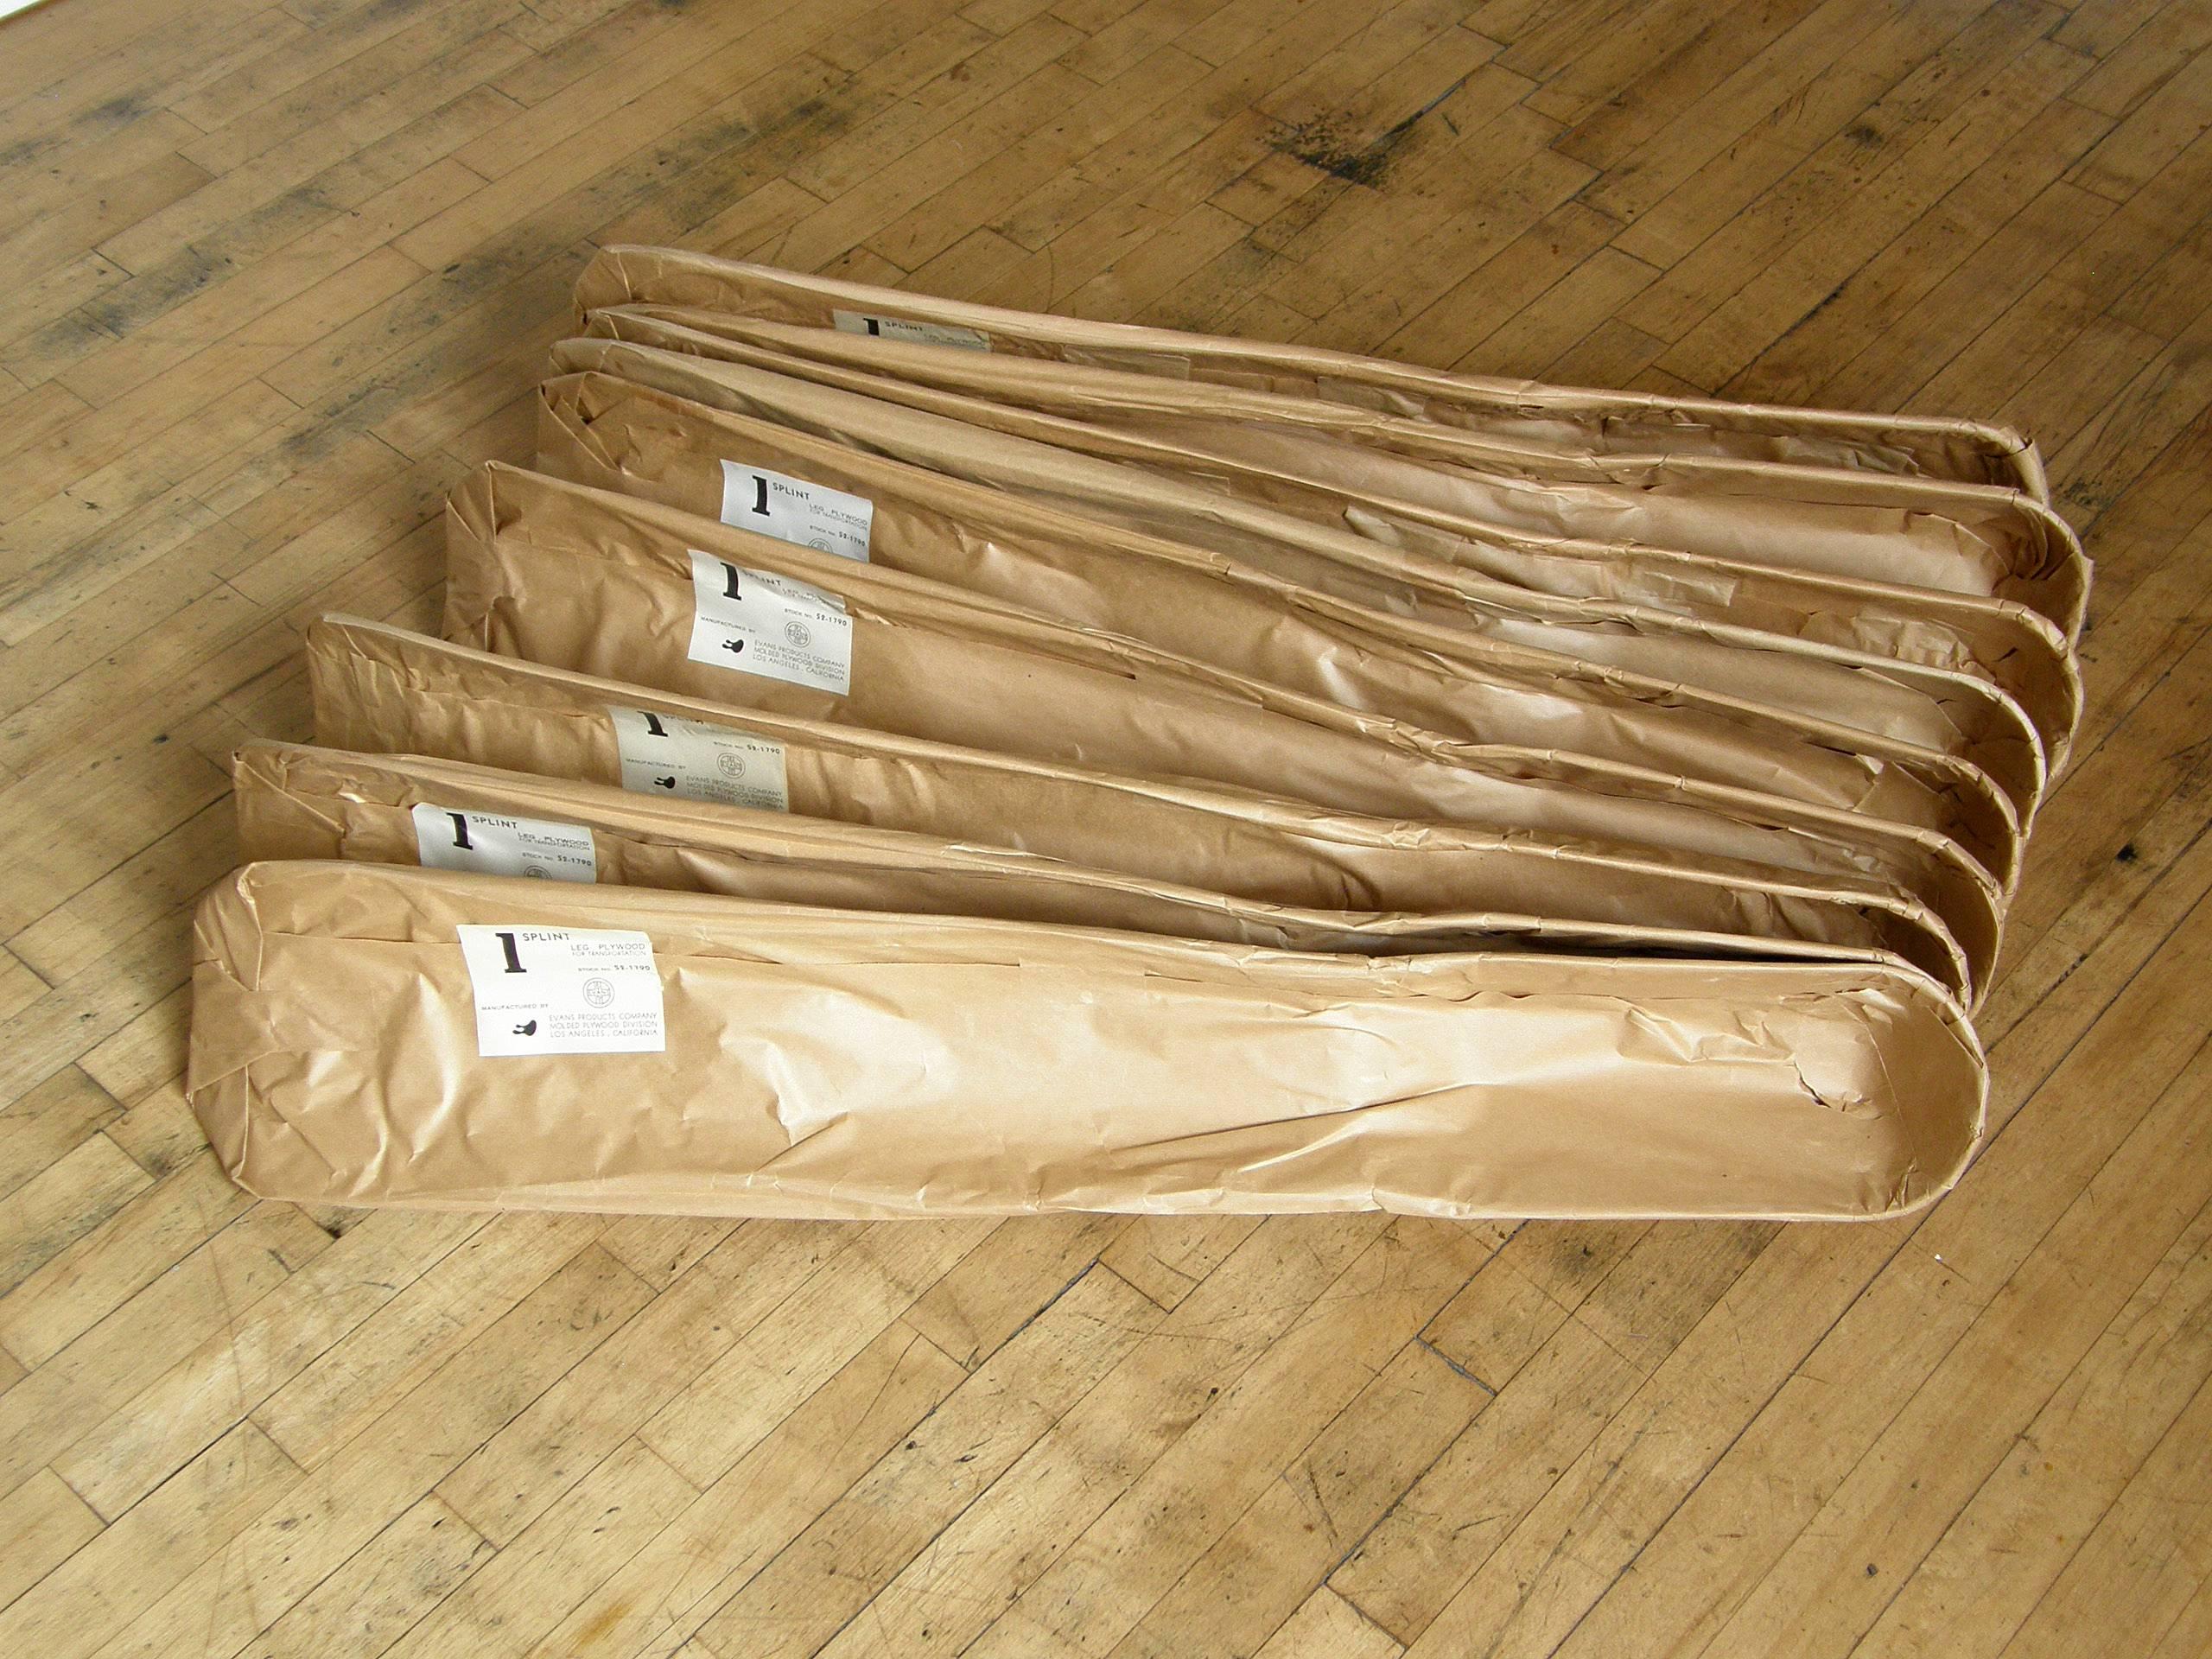 Mid-Century Modern Two Eames Molded Plywood Leg Splints for Evans Only One in Its Original Wrapper